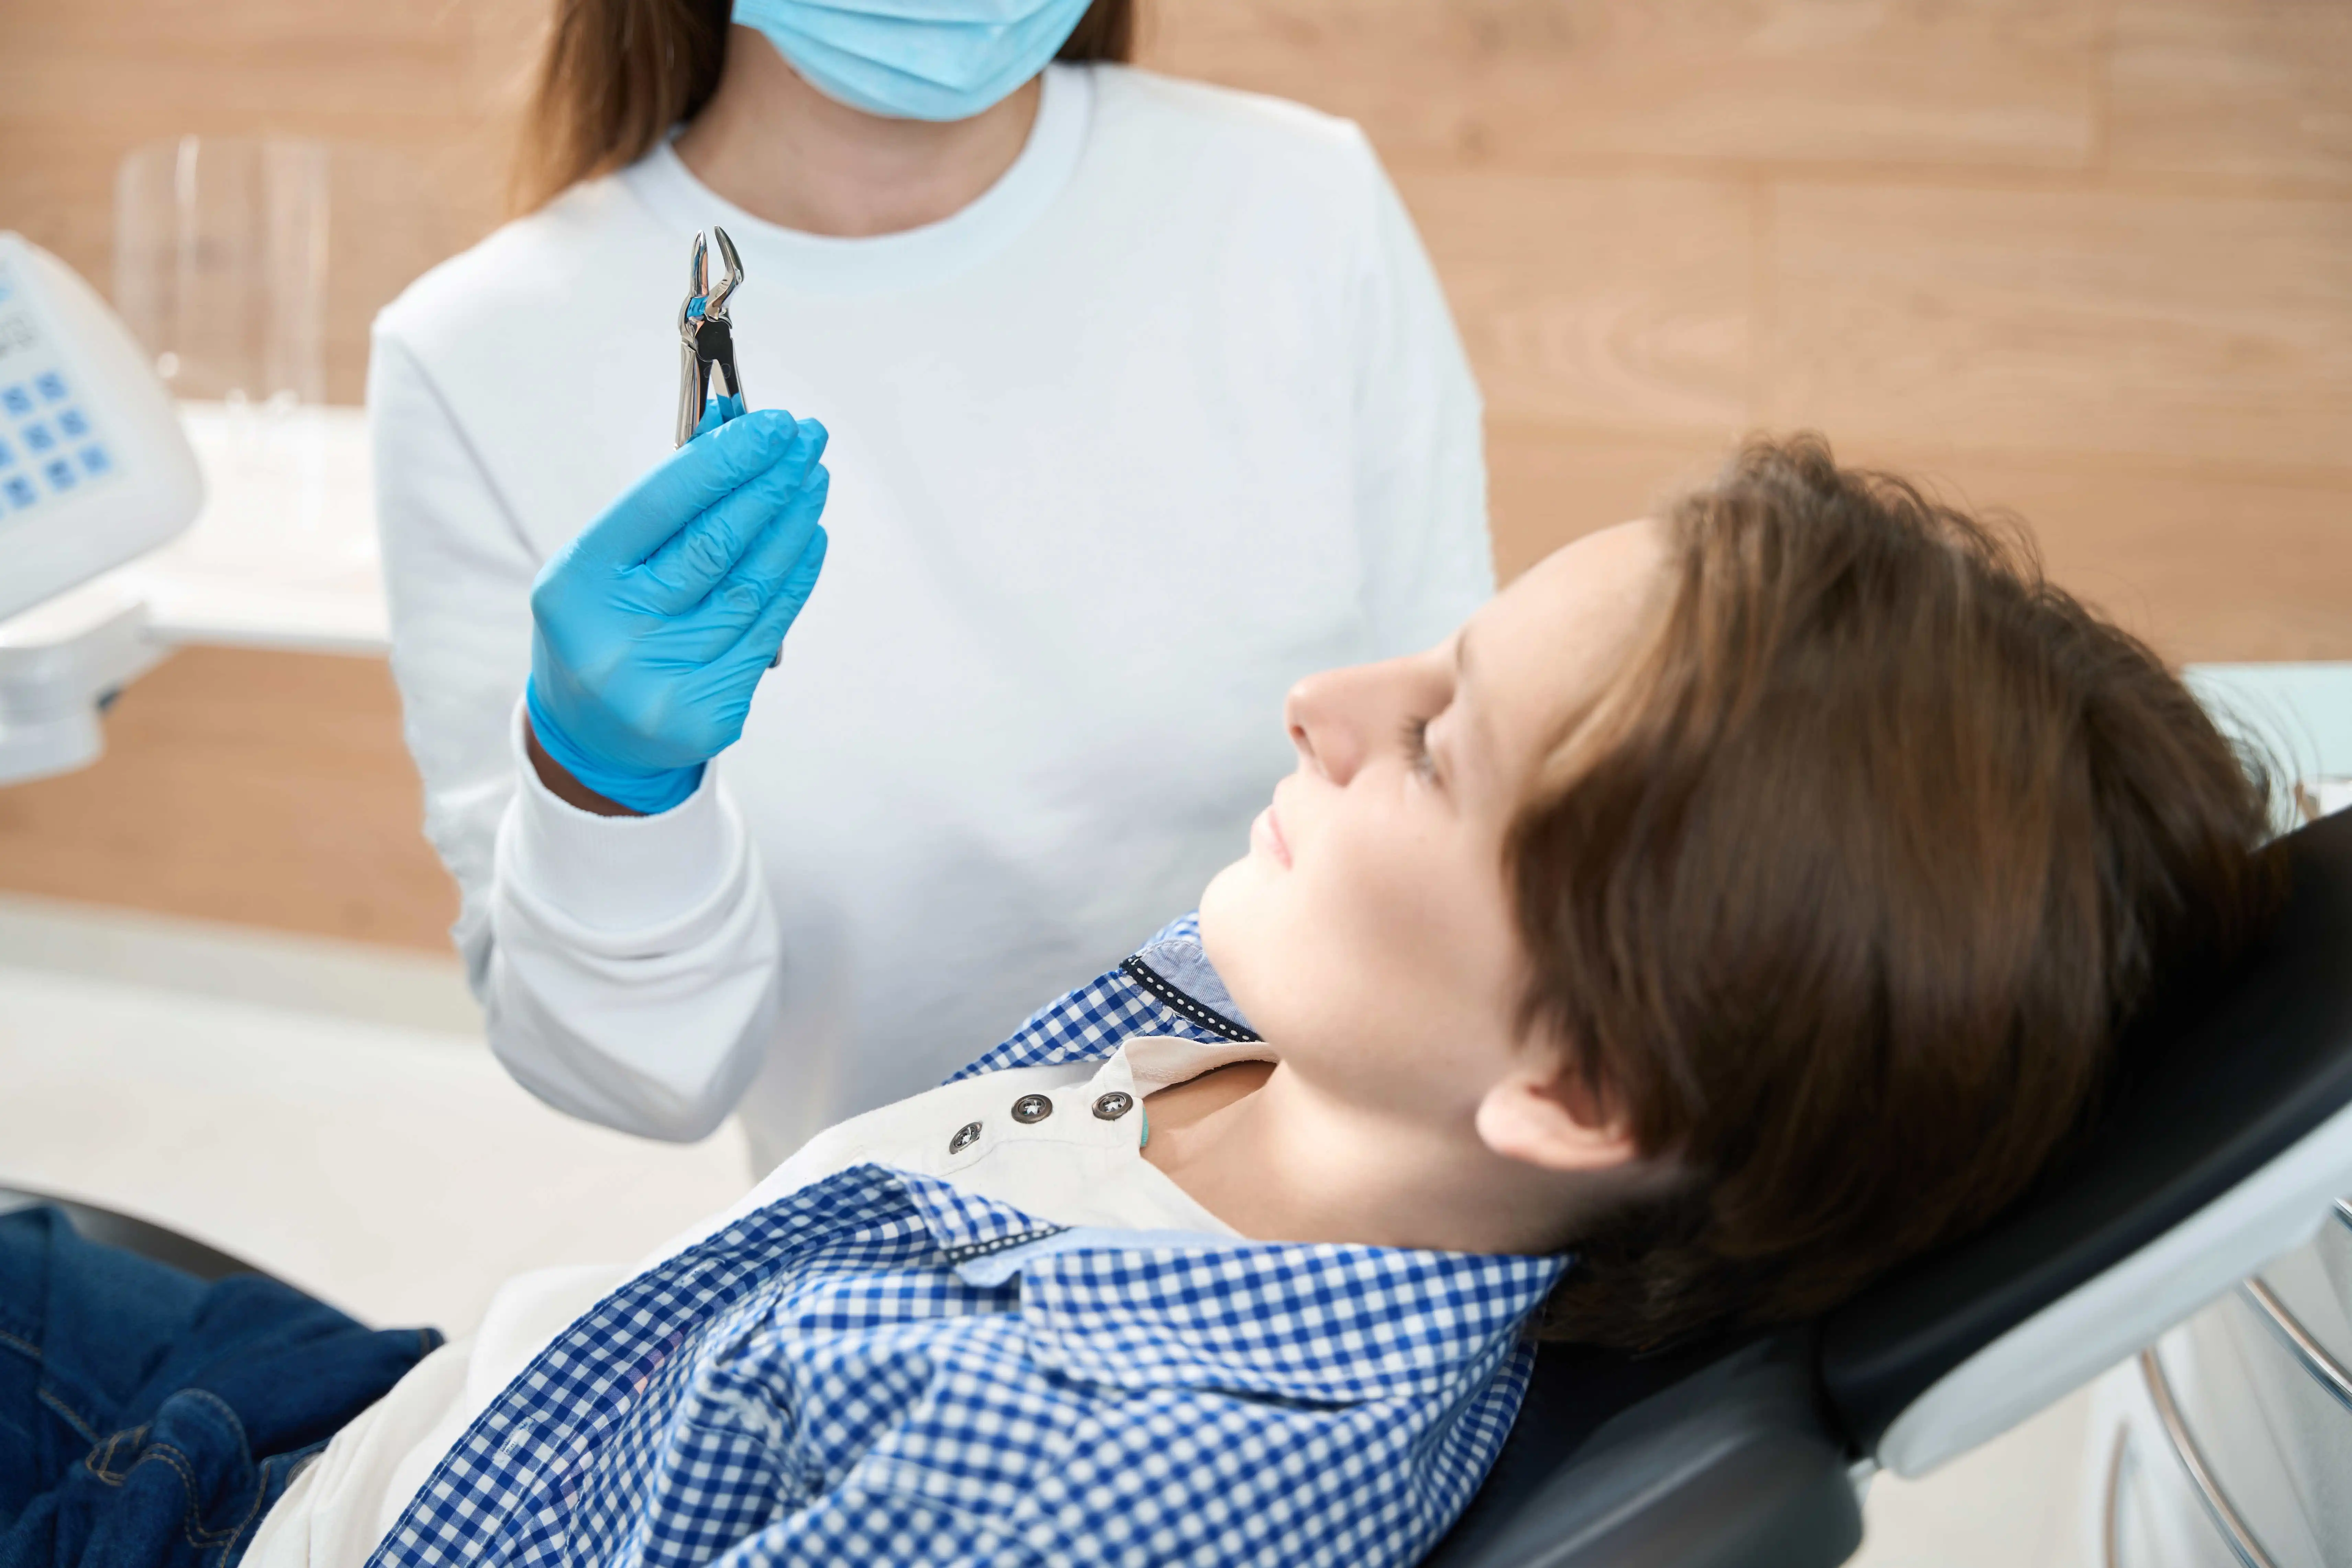 How Long Will Pain Last After Tooth Extraction